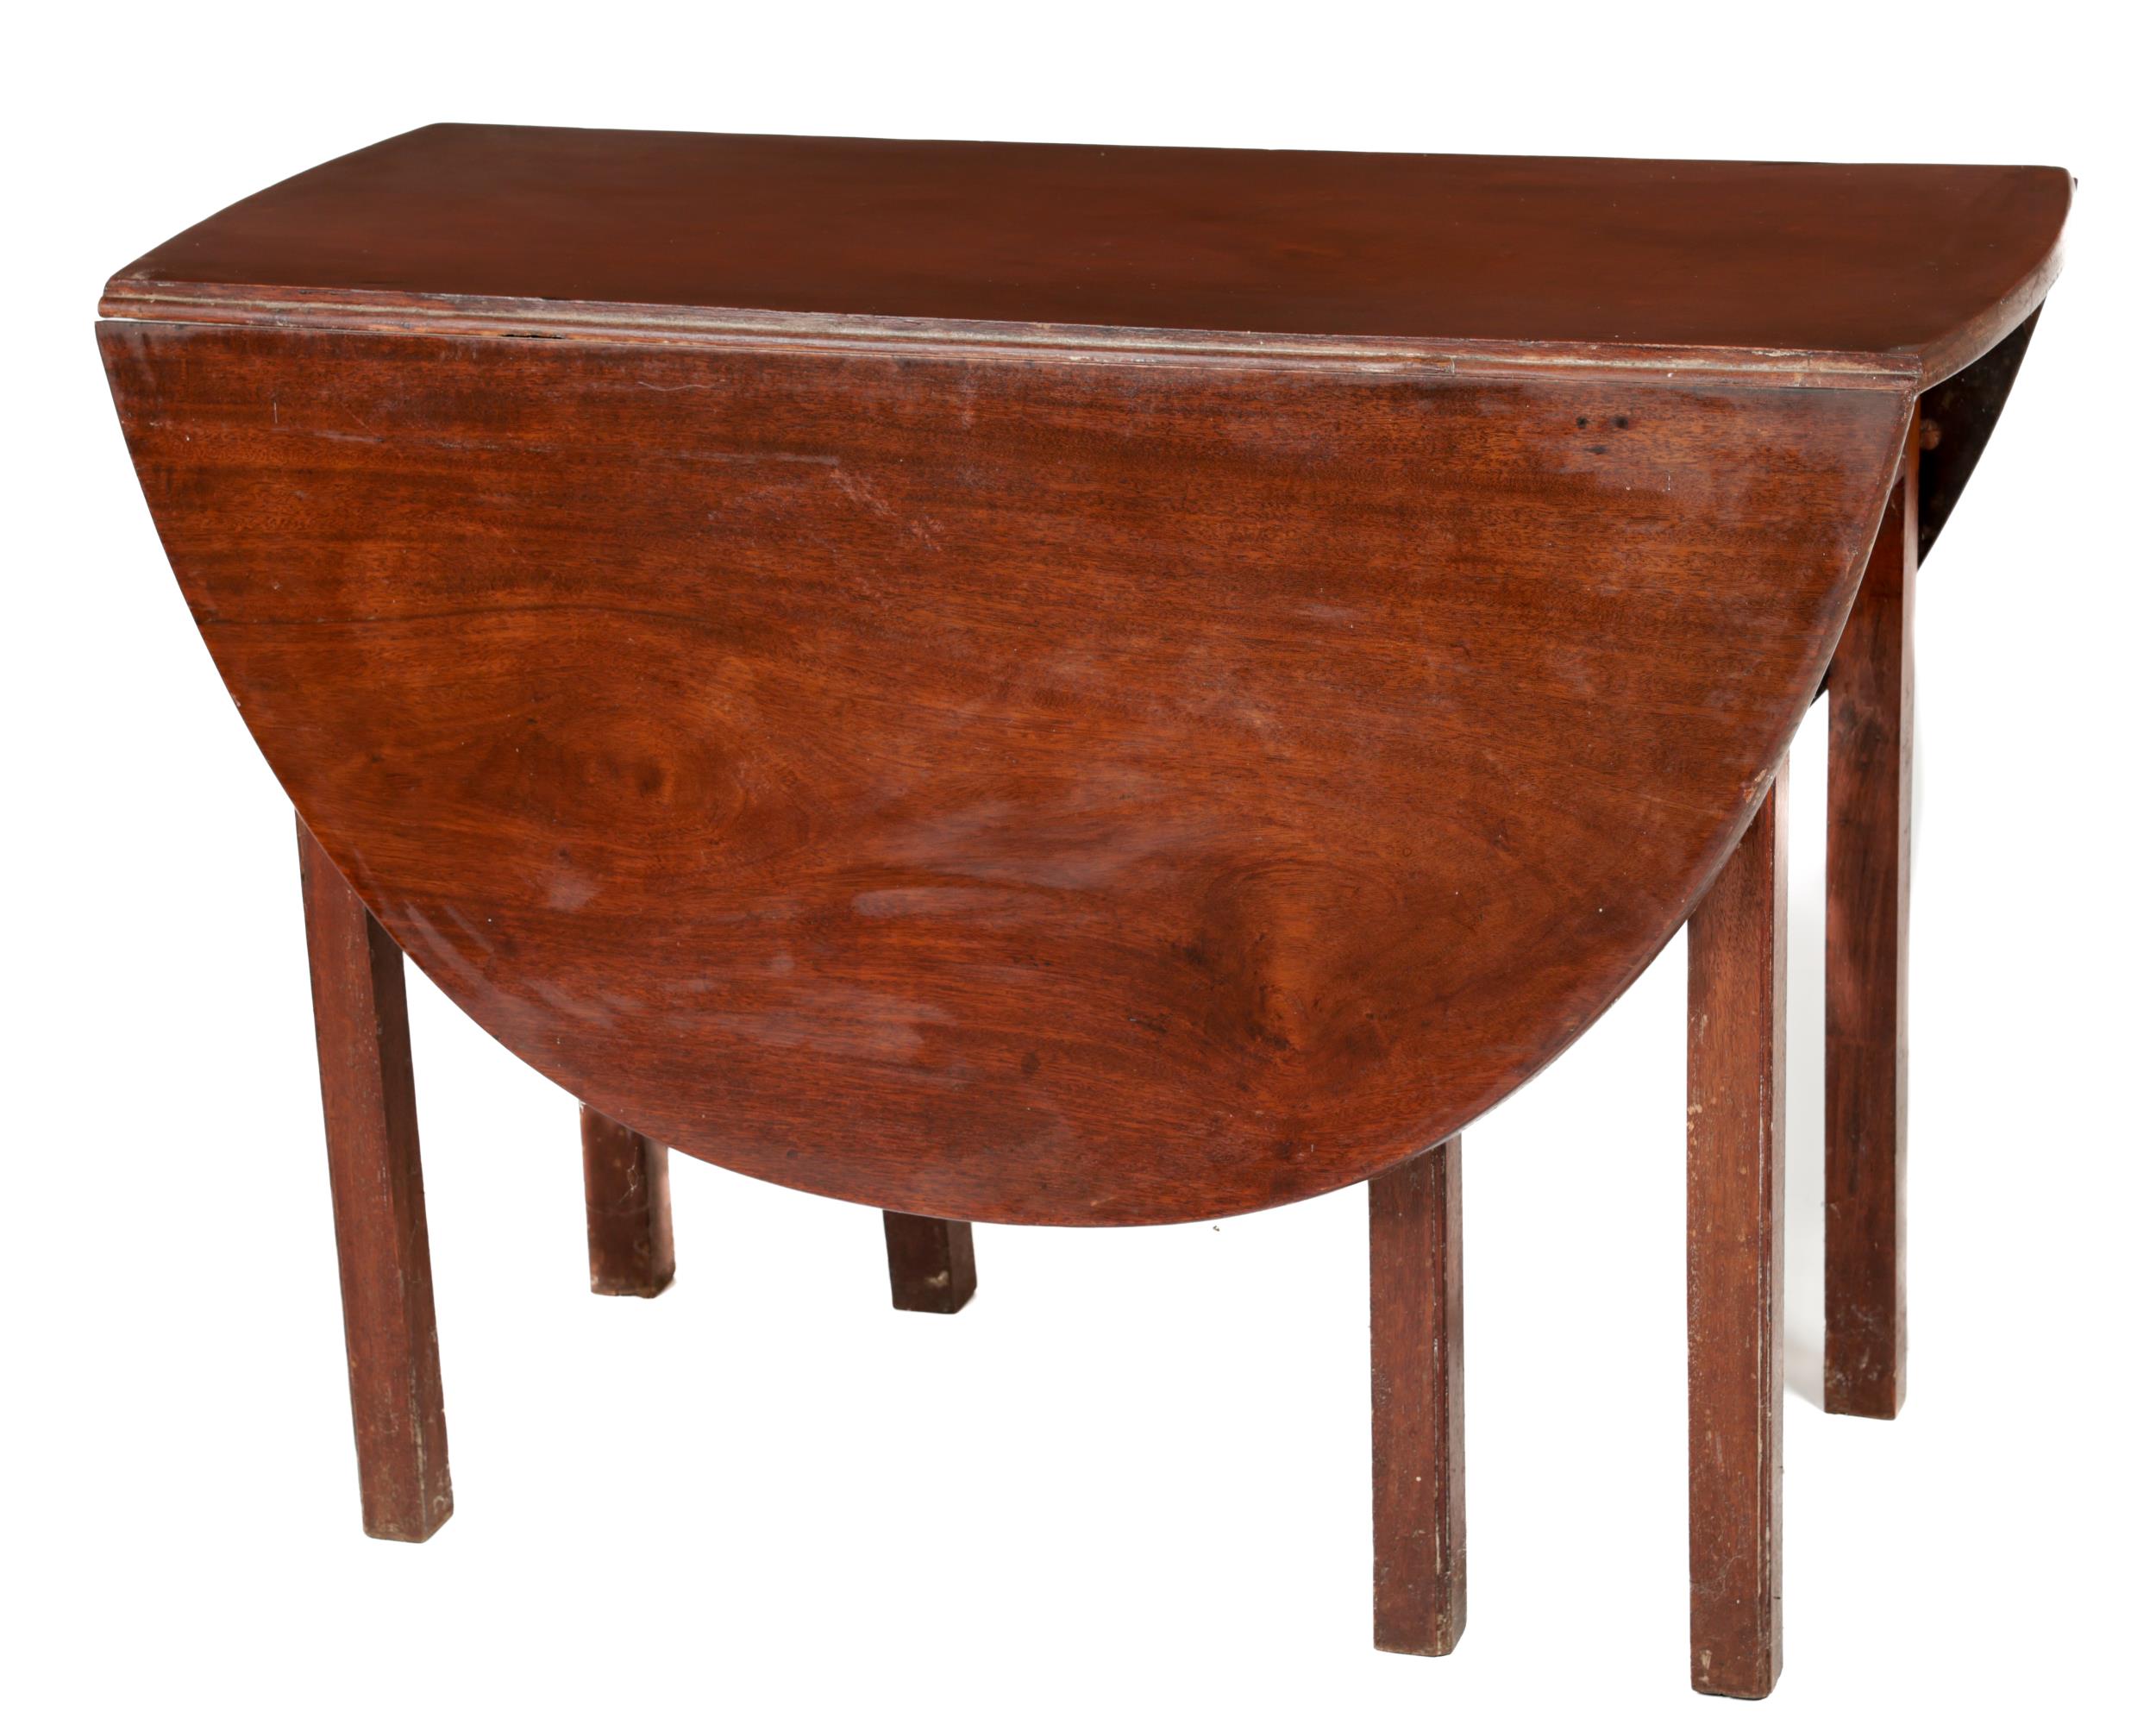 A 19th Century Irish Provincial mahogany drop-leaf gate-leg Table, with demi-lune flaps on square